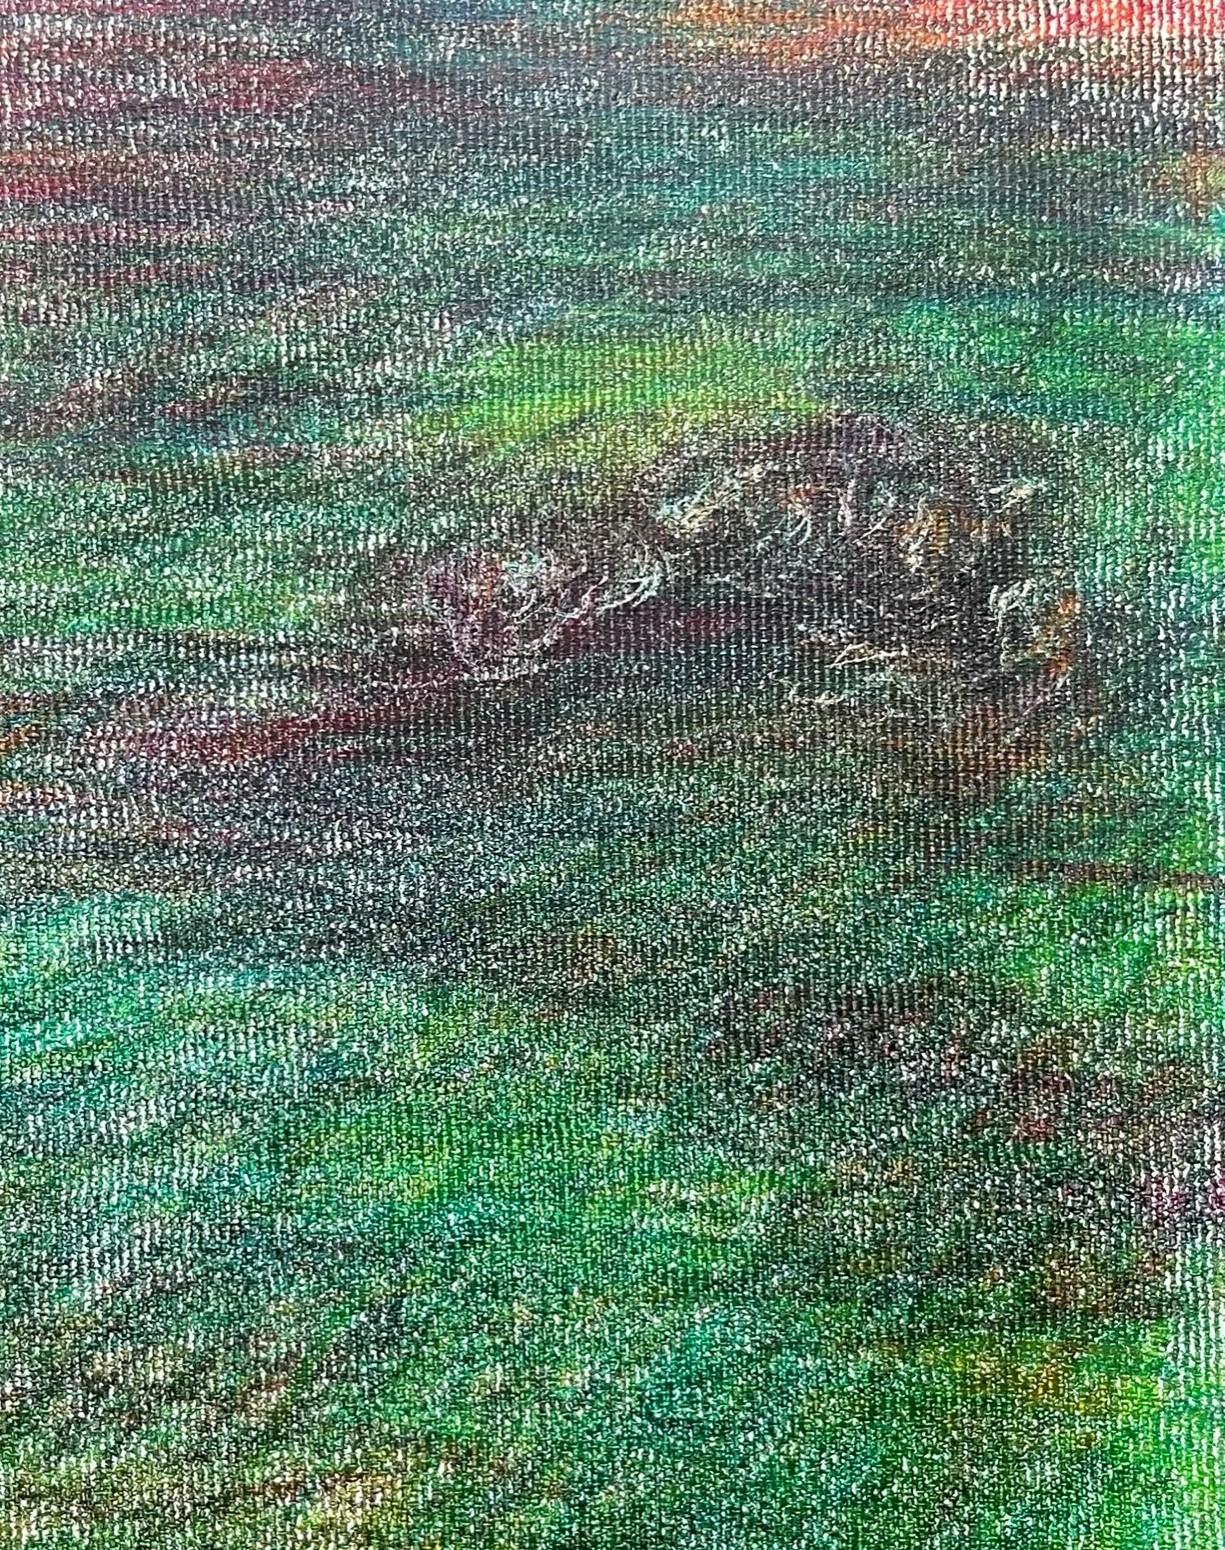 Body in the Field #14, 2022
coloured pencil on canvas
9.84 H x 6.29 W in.
25 H x 16 W cm
Signed on reverse

Zsolt Berszán embodies in his works the dissolution of the human body through the prism of the fragment, the body in pieces, and the skeletal